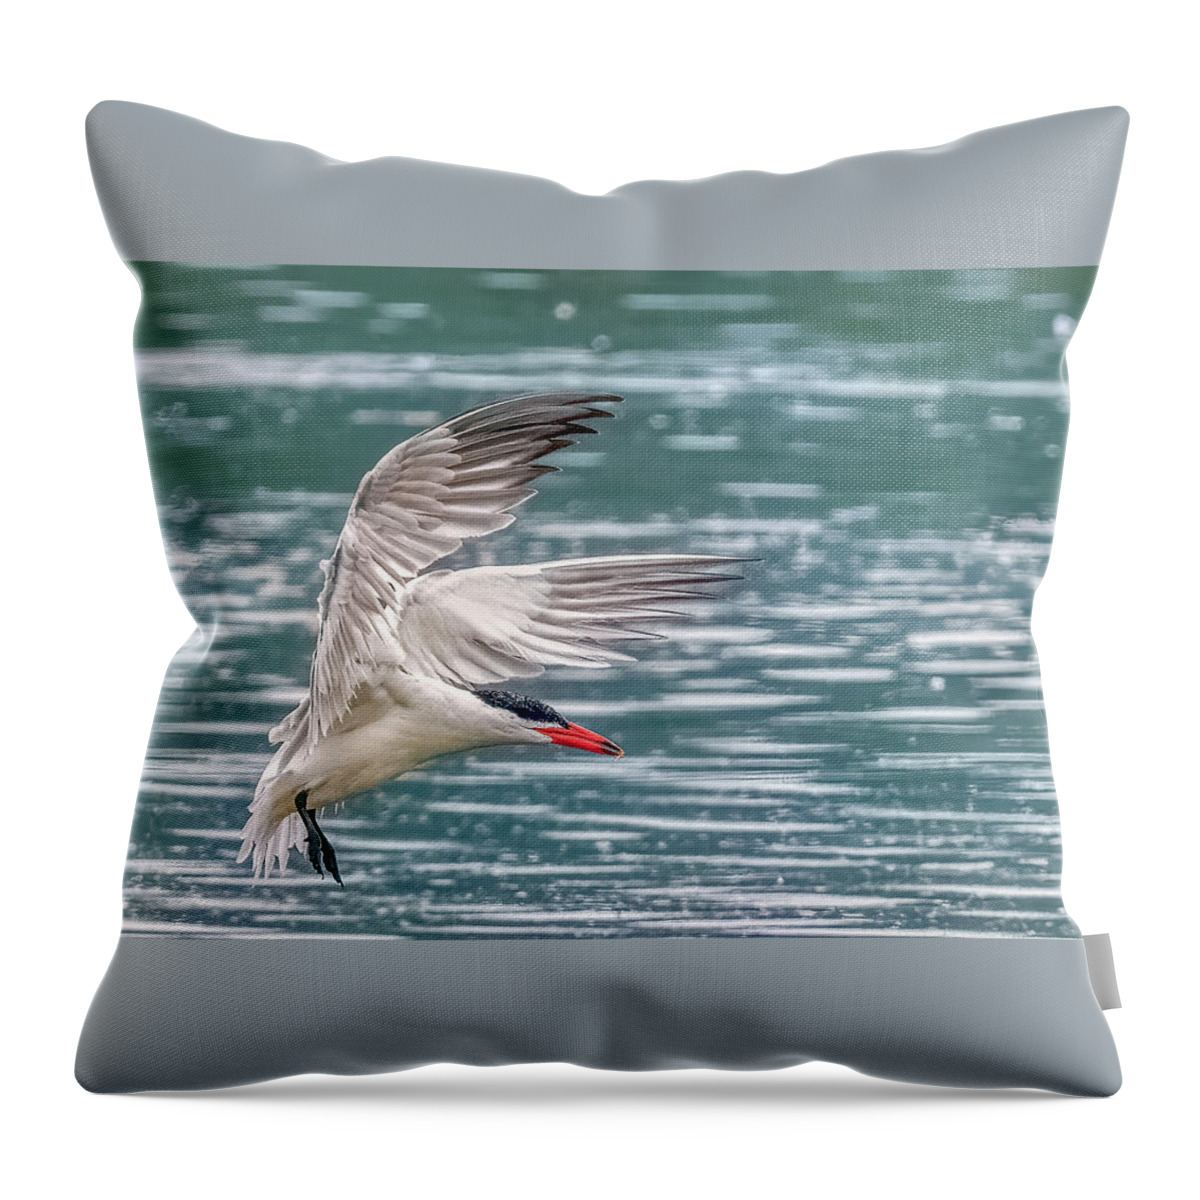 Caspian Tern Throw Pillow featuring the photograph Caspian Tern by Timothy Anable